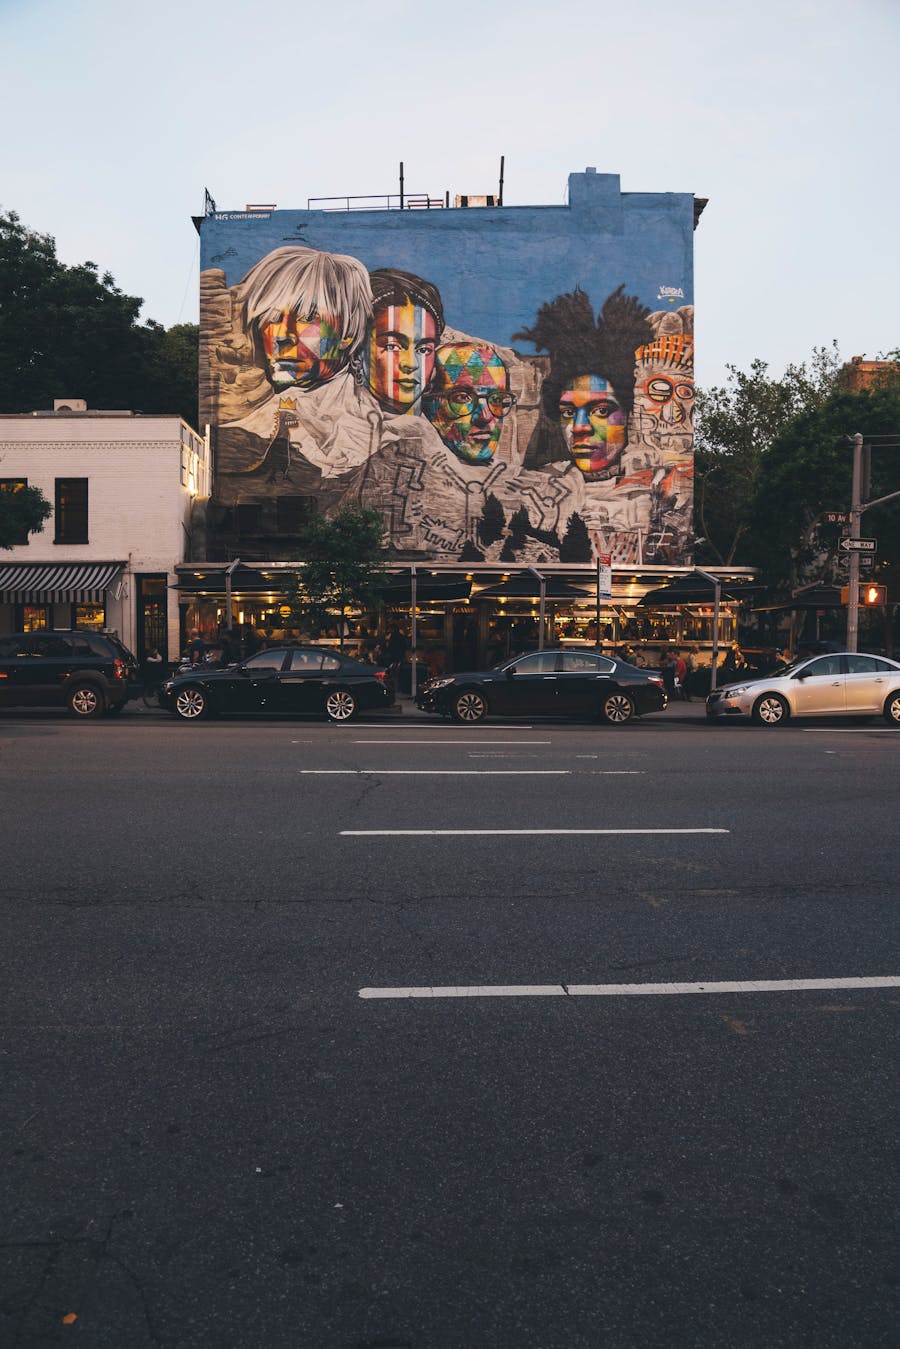 A mural in New York decorated with the faces of Andy Warhol, Frida Kahlo, Keith Haring and Jean - Michel Basquiat. Photo: who?du!nelson via Unsplash